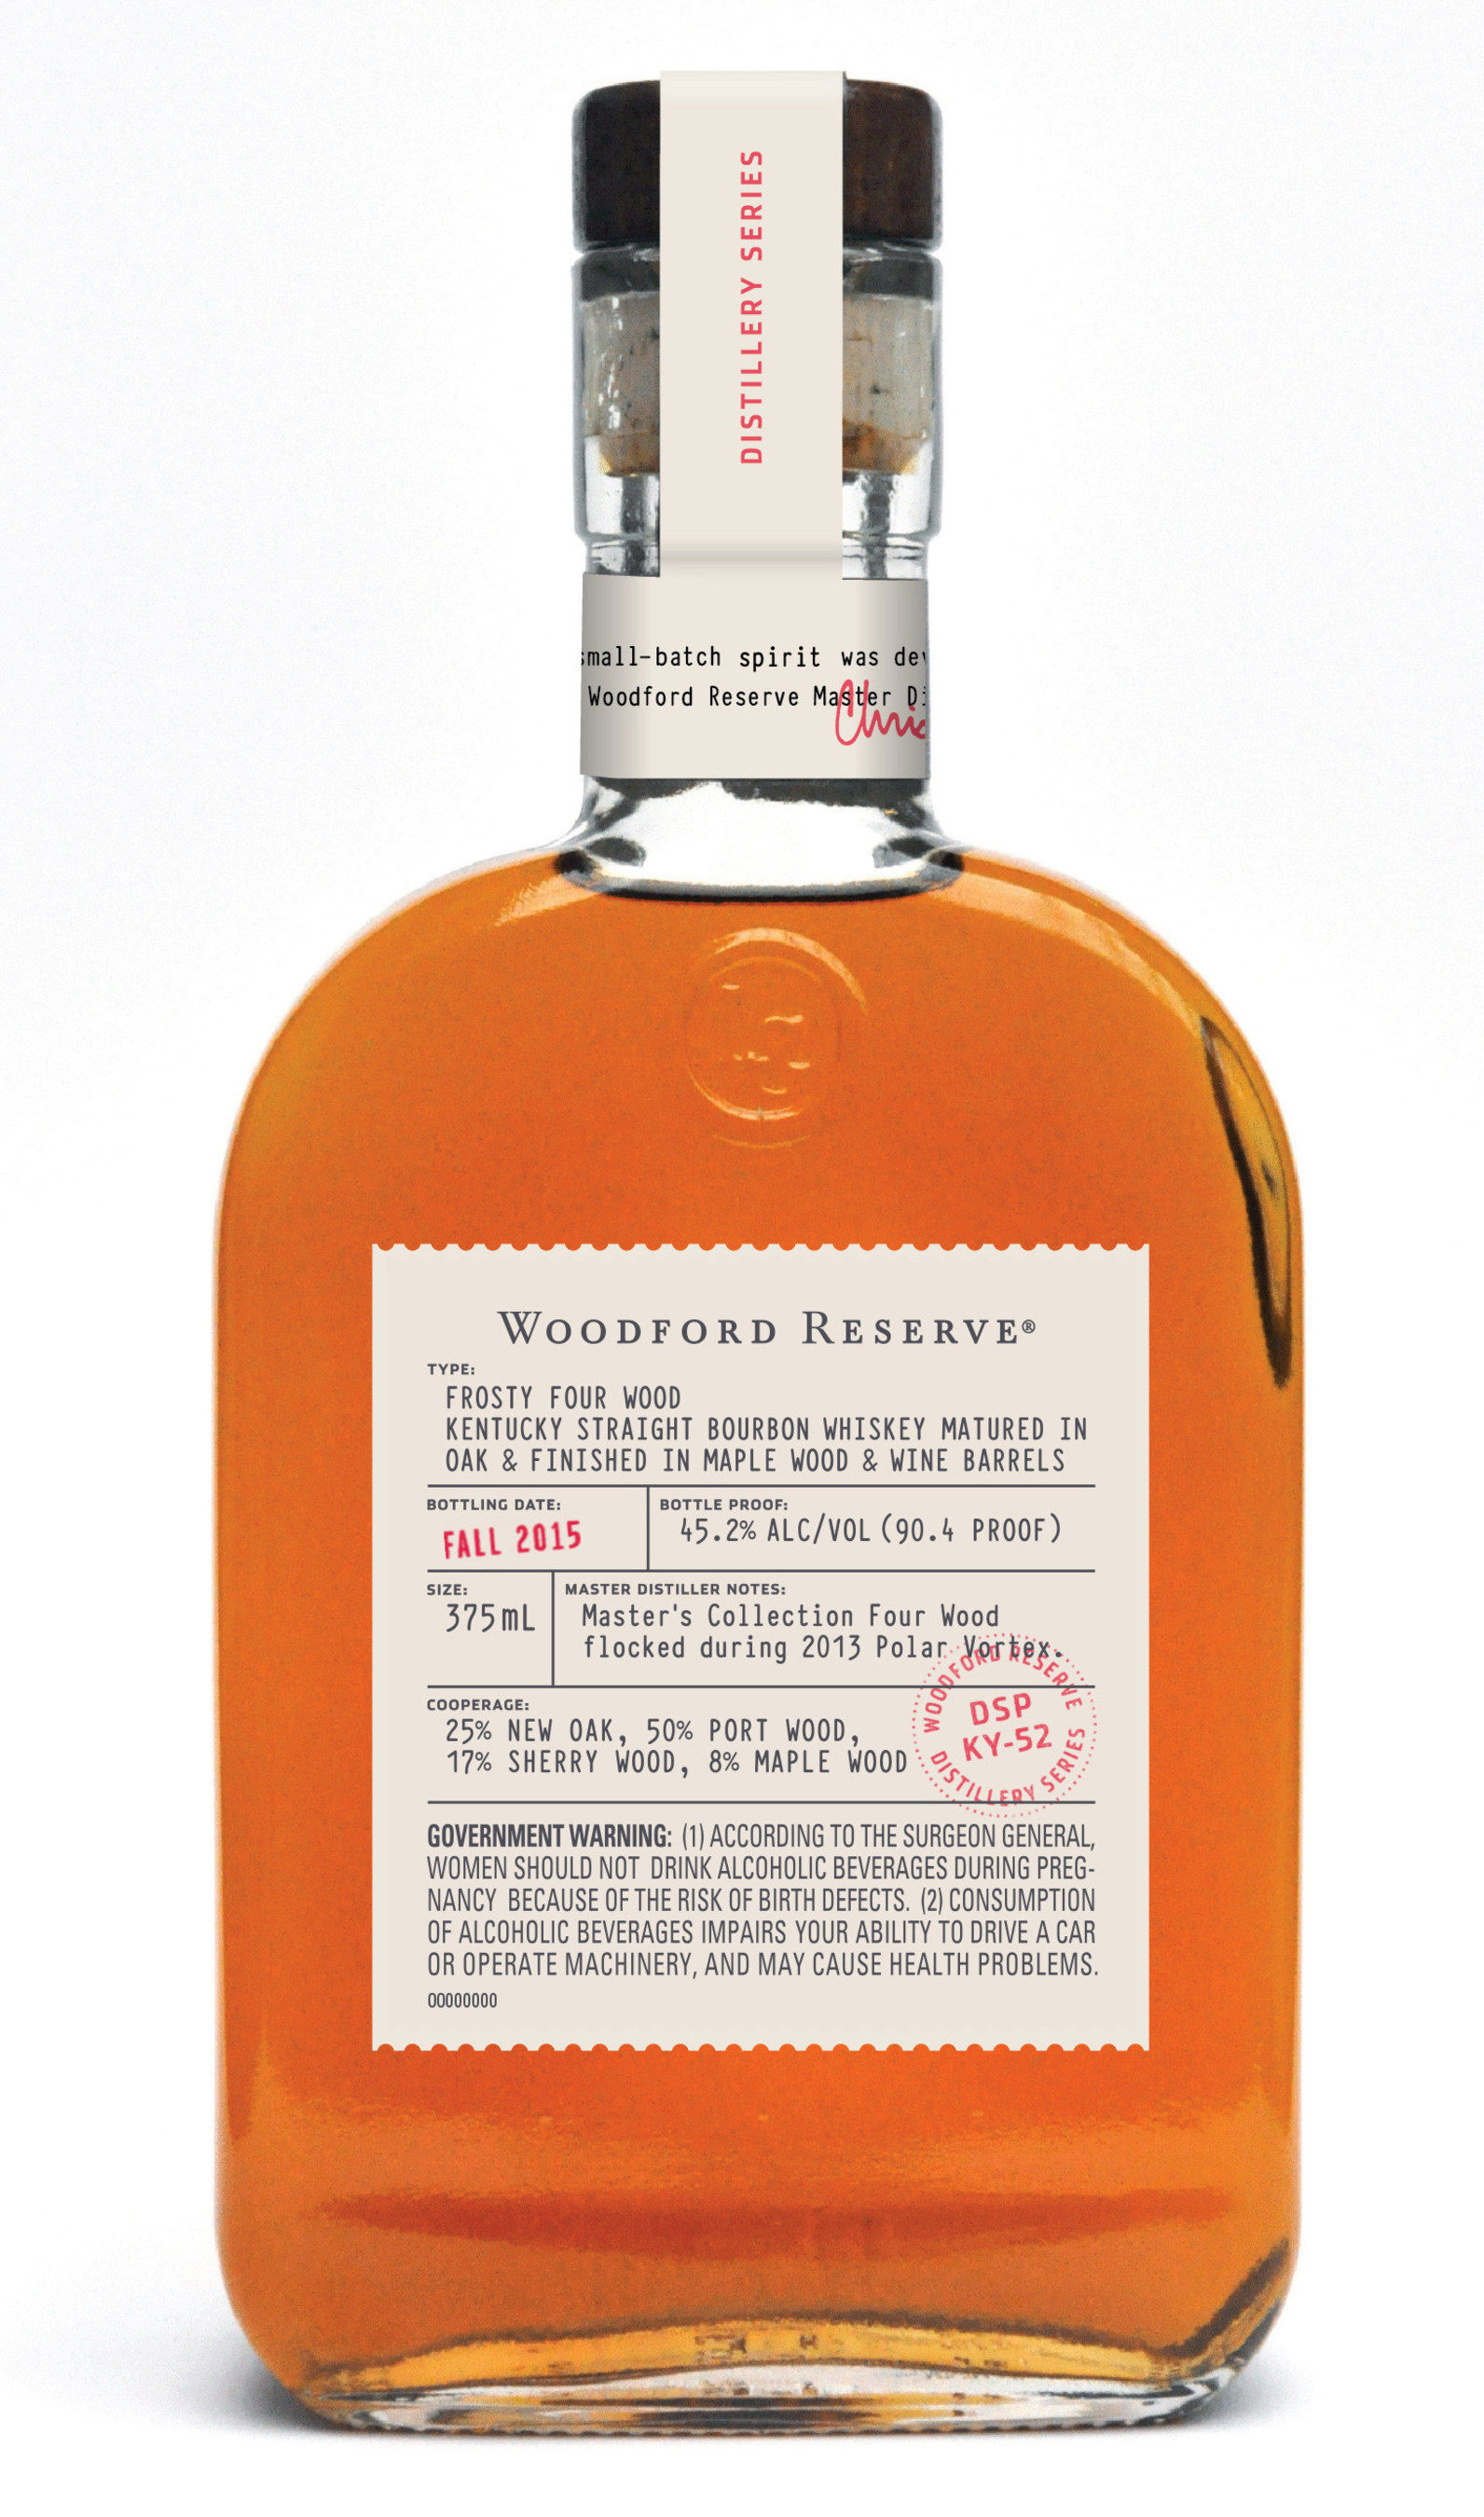 Woodford Reserve announces the latest expression in its Distillery Series, Frosty Four Wood, available at the distillery and select Kentucky retailers.